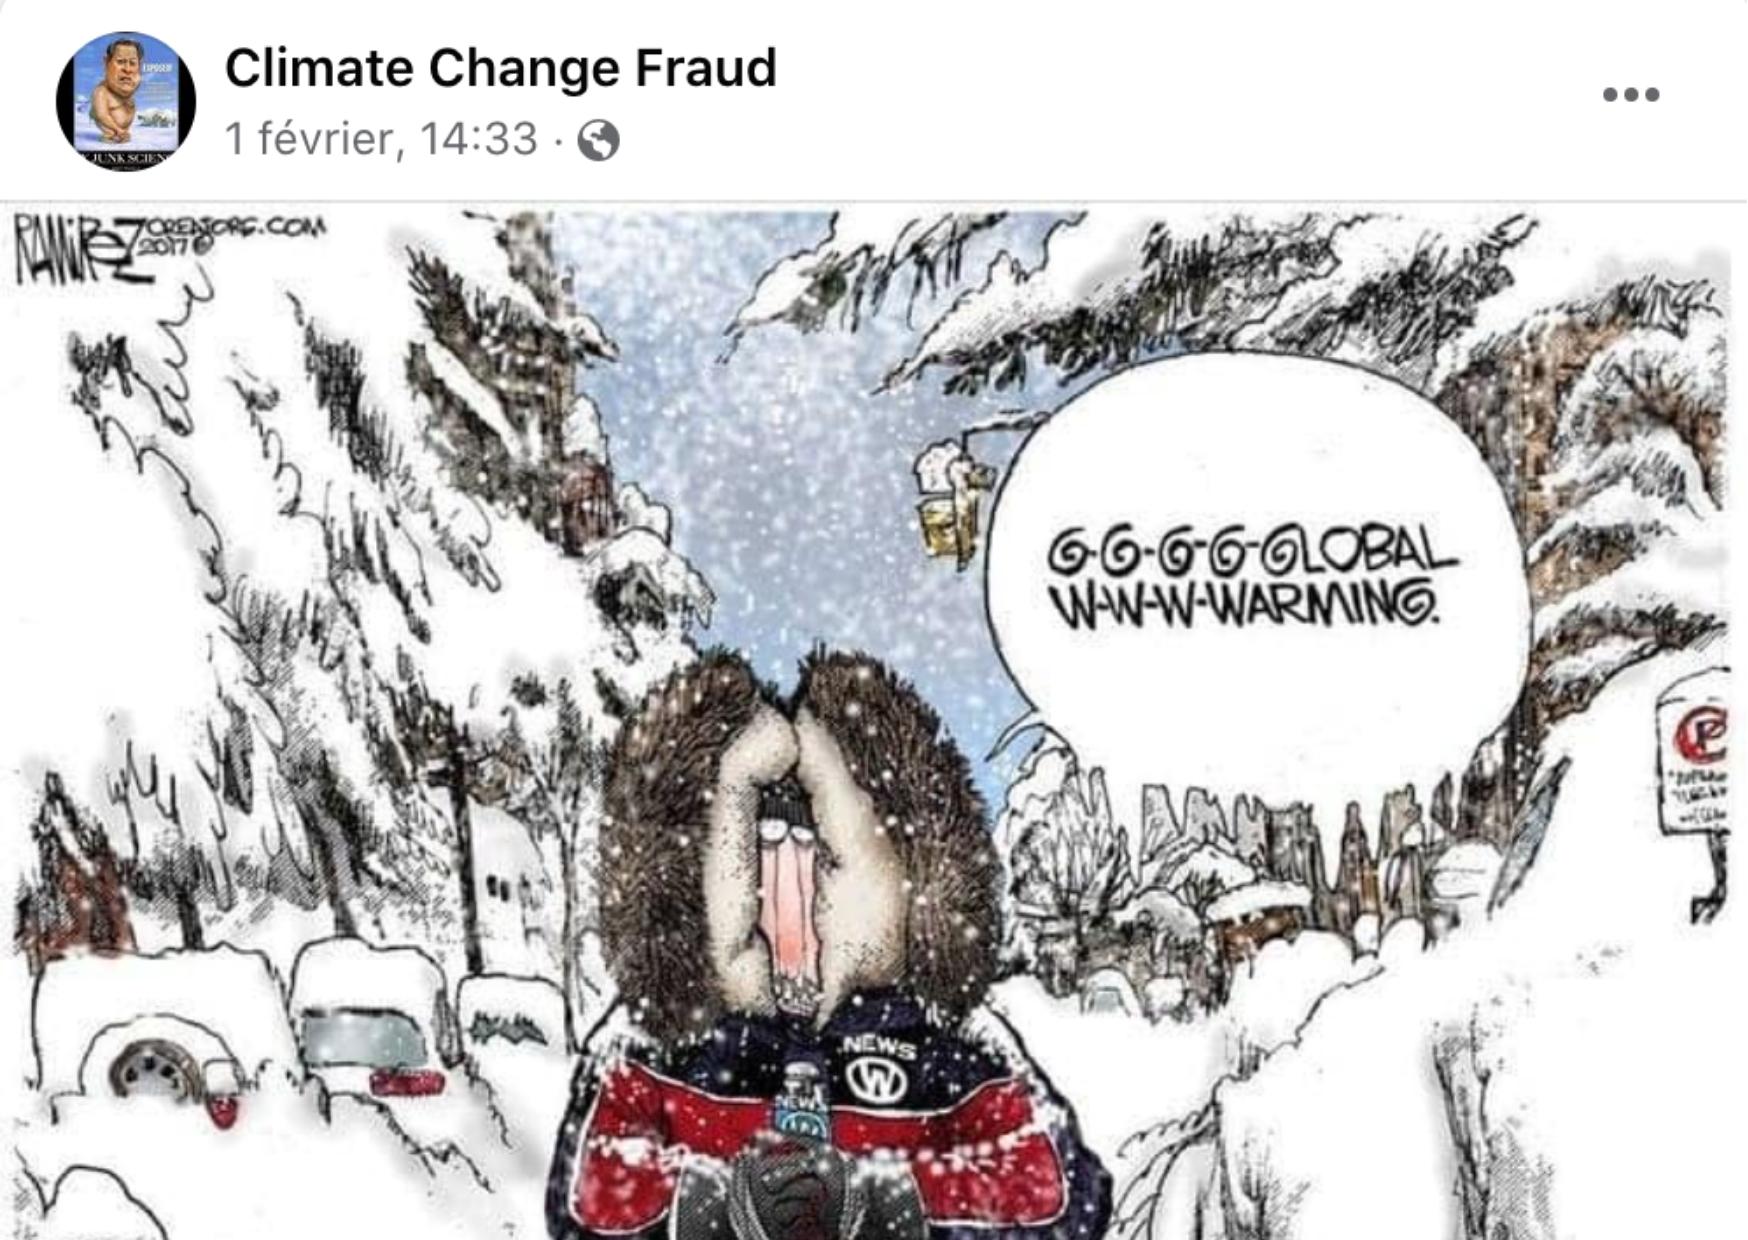 Climate change hoax